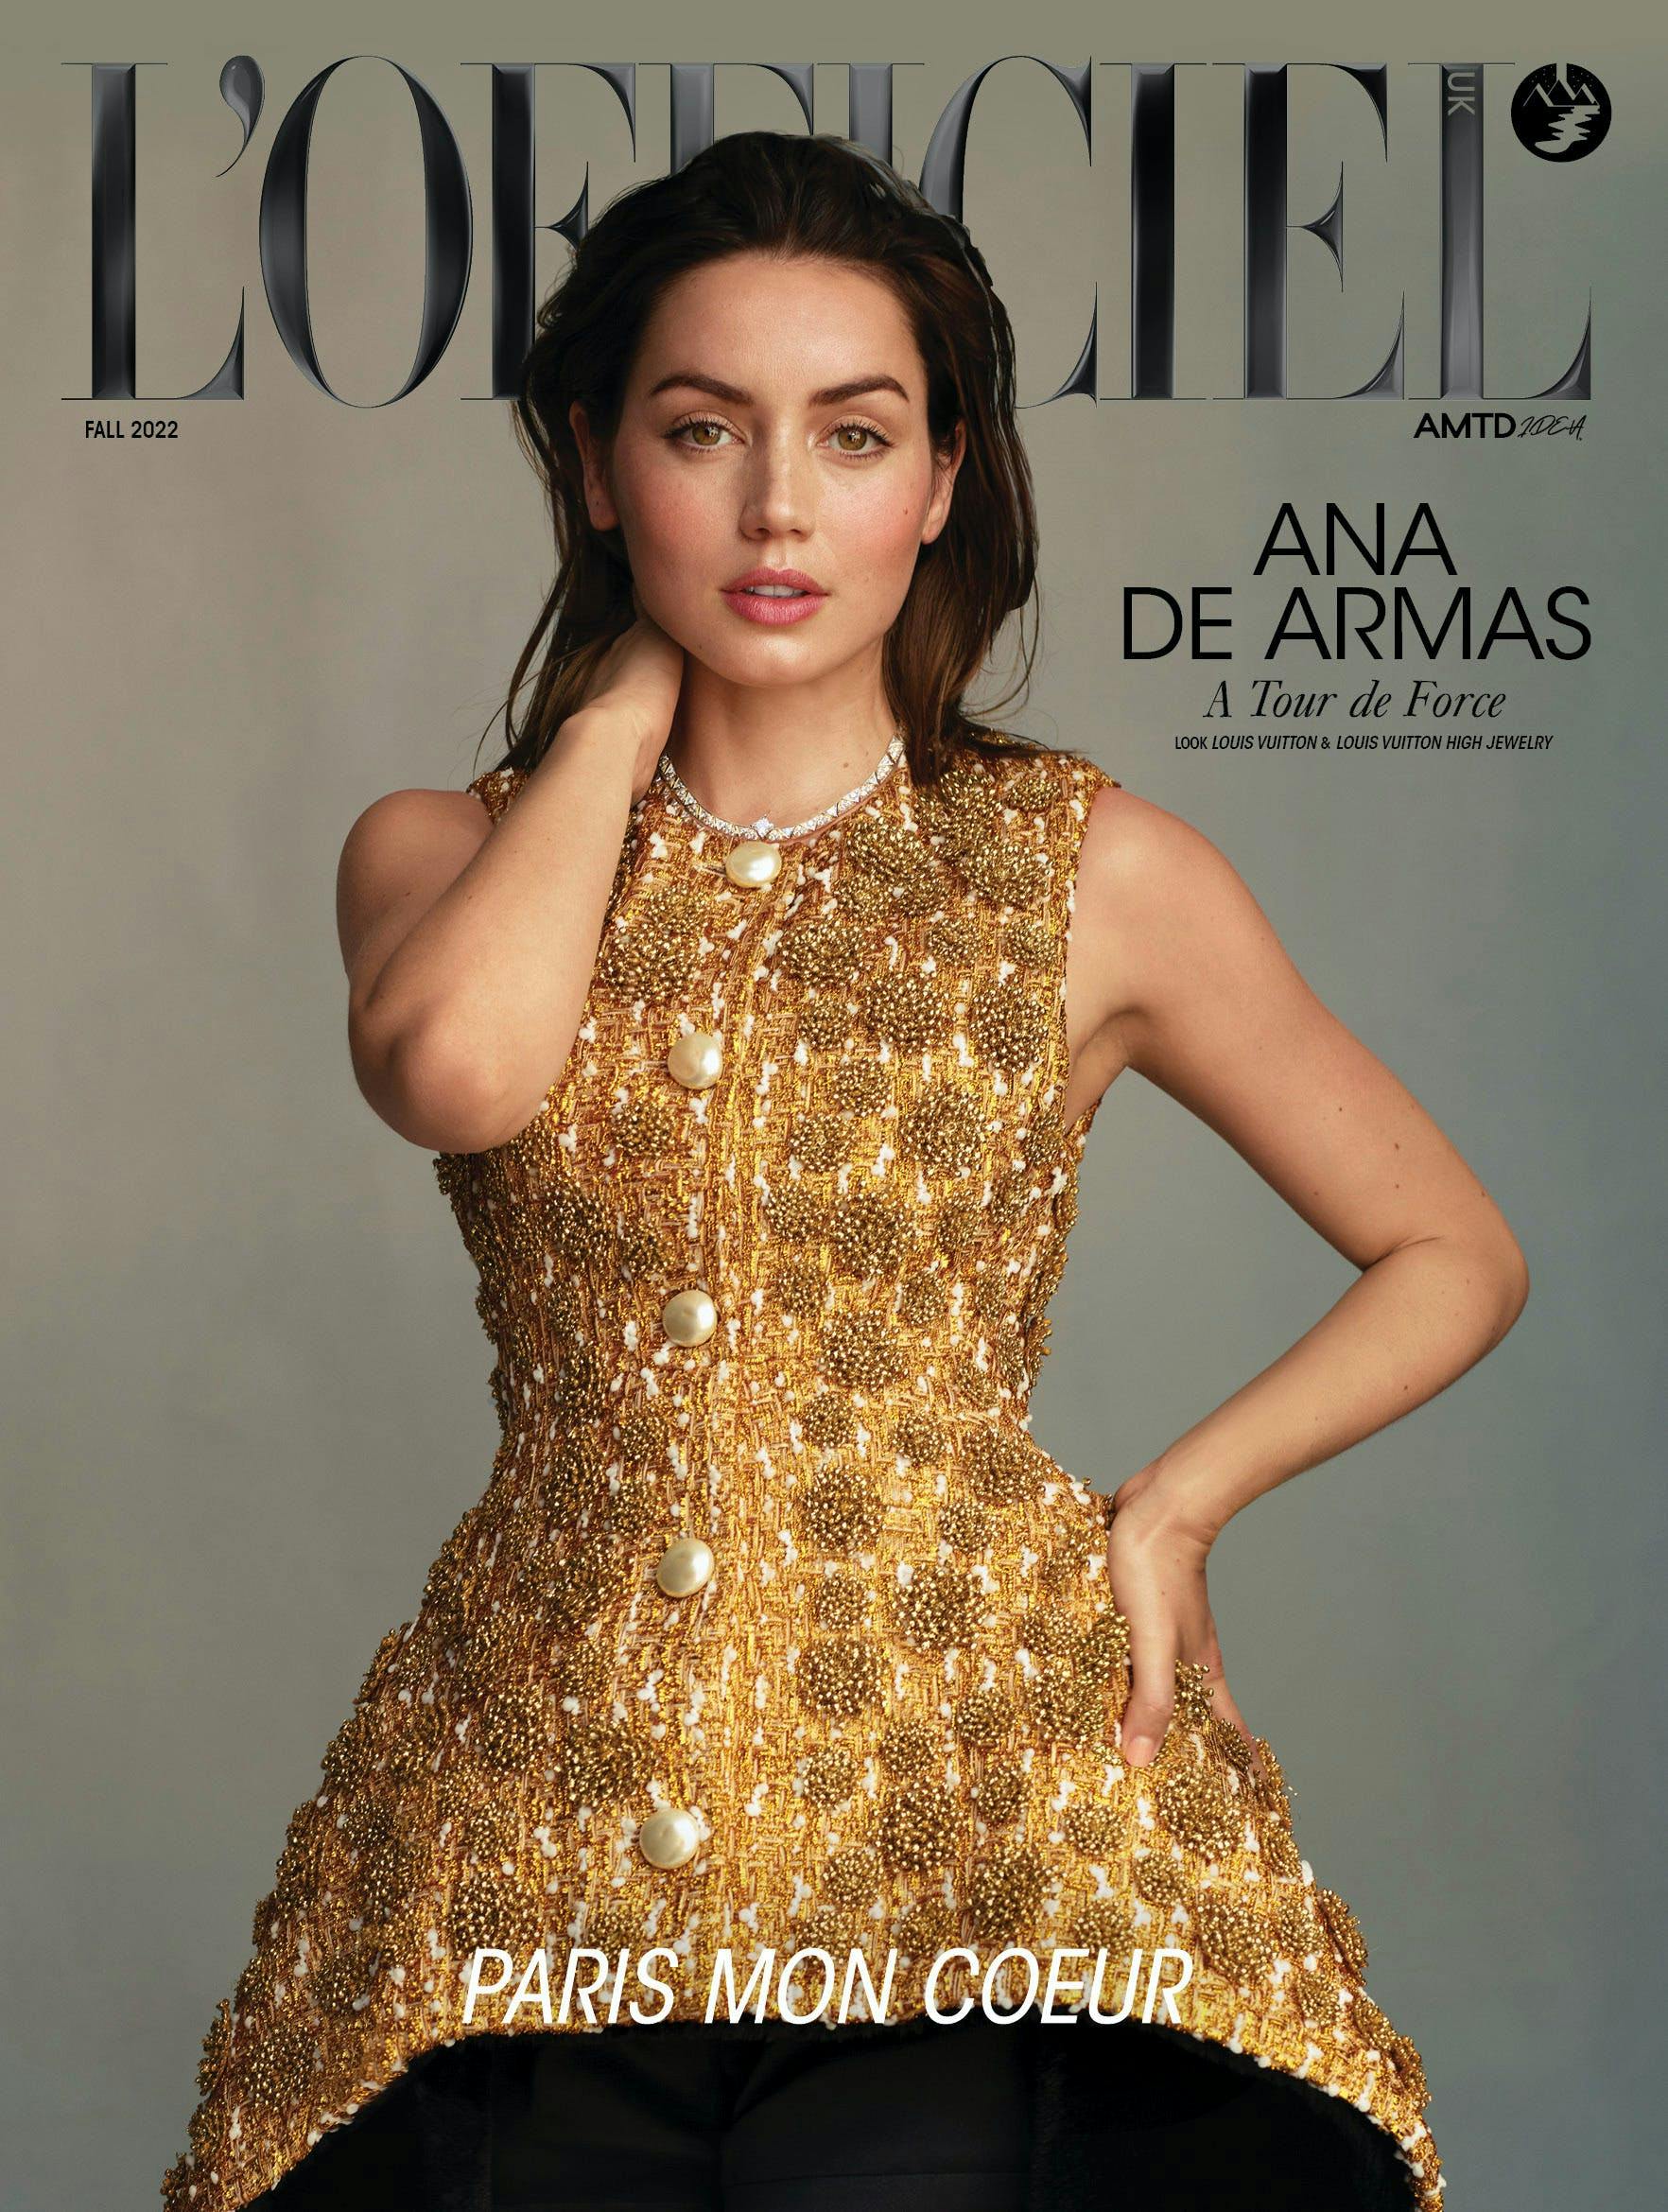 L'OFFICIEL UK Fall 2022 cover of Ana de Armas standing with one hand on her hip and the other on her neck wearing a gold embellished mini dress.